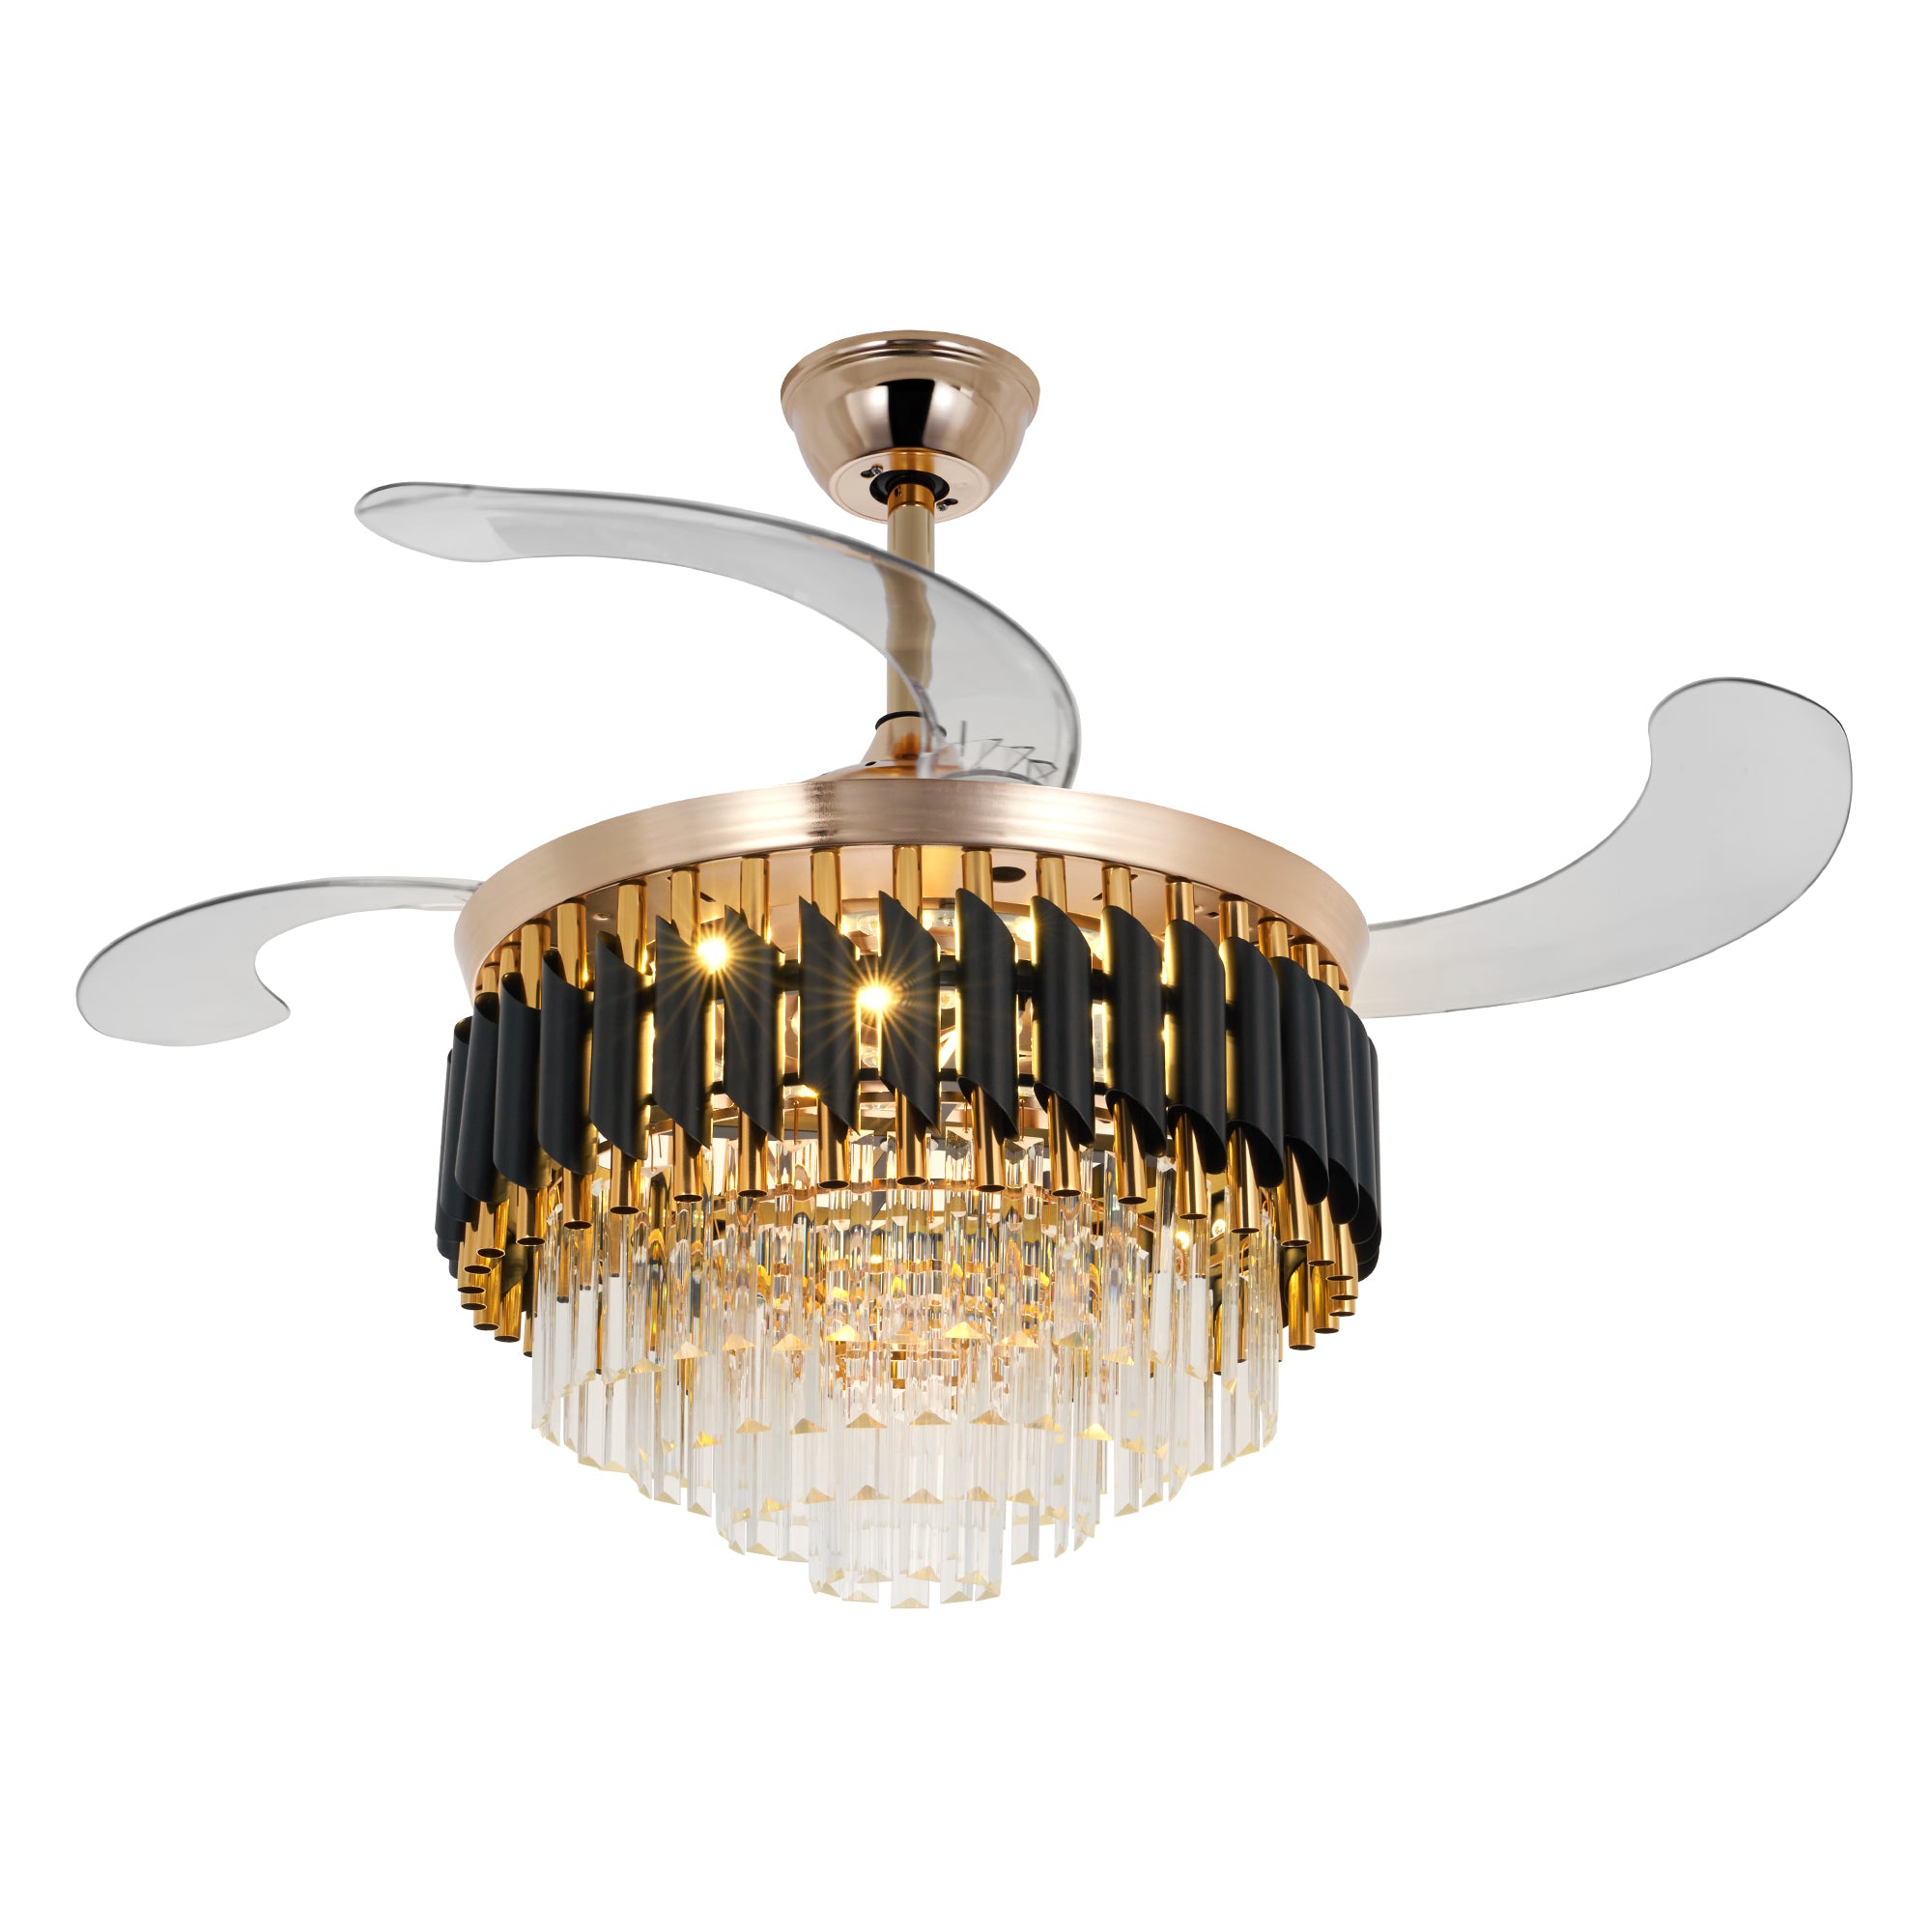 42" Crystal Celing Fan with LED Lights (Gold) DS-FZ188